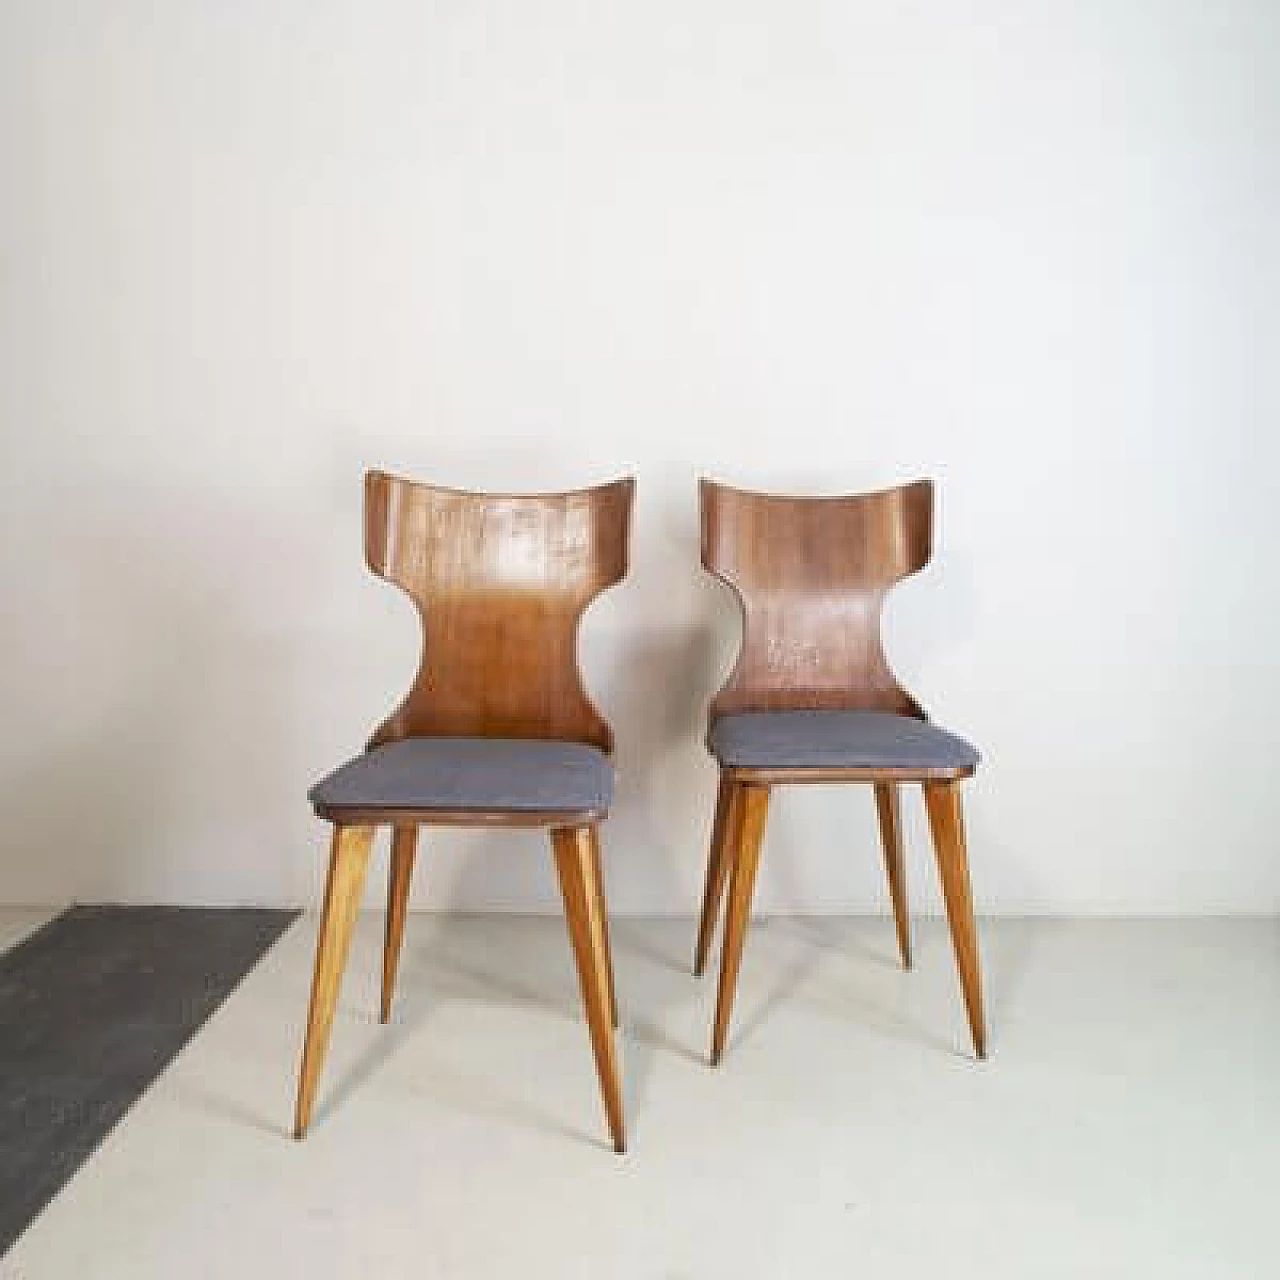 Pair of Curved Wooden Chairs by Carlo Ratti, 1950s 6